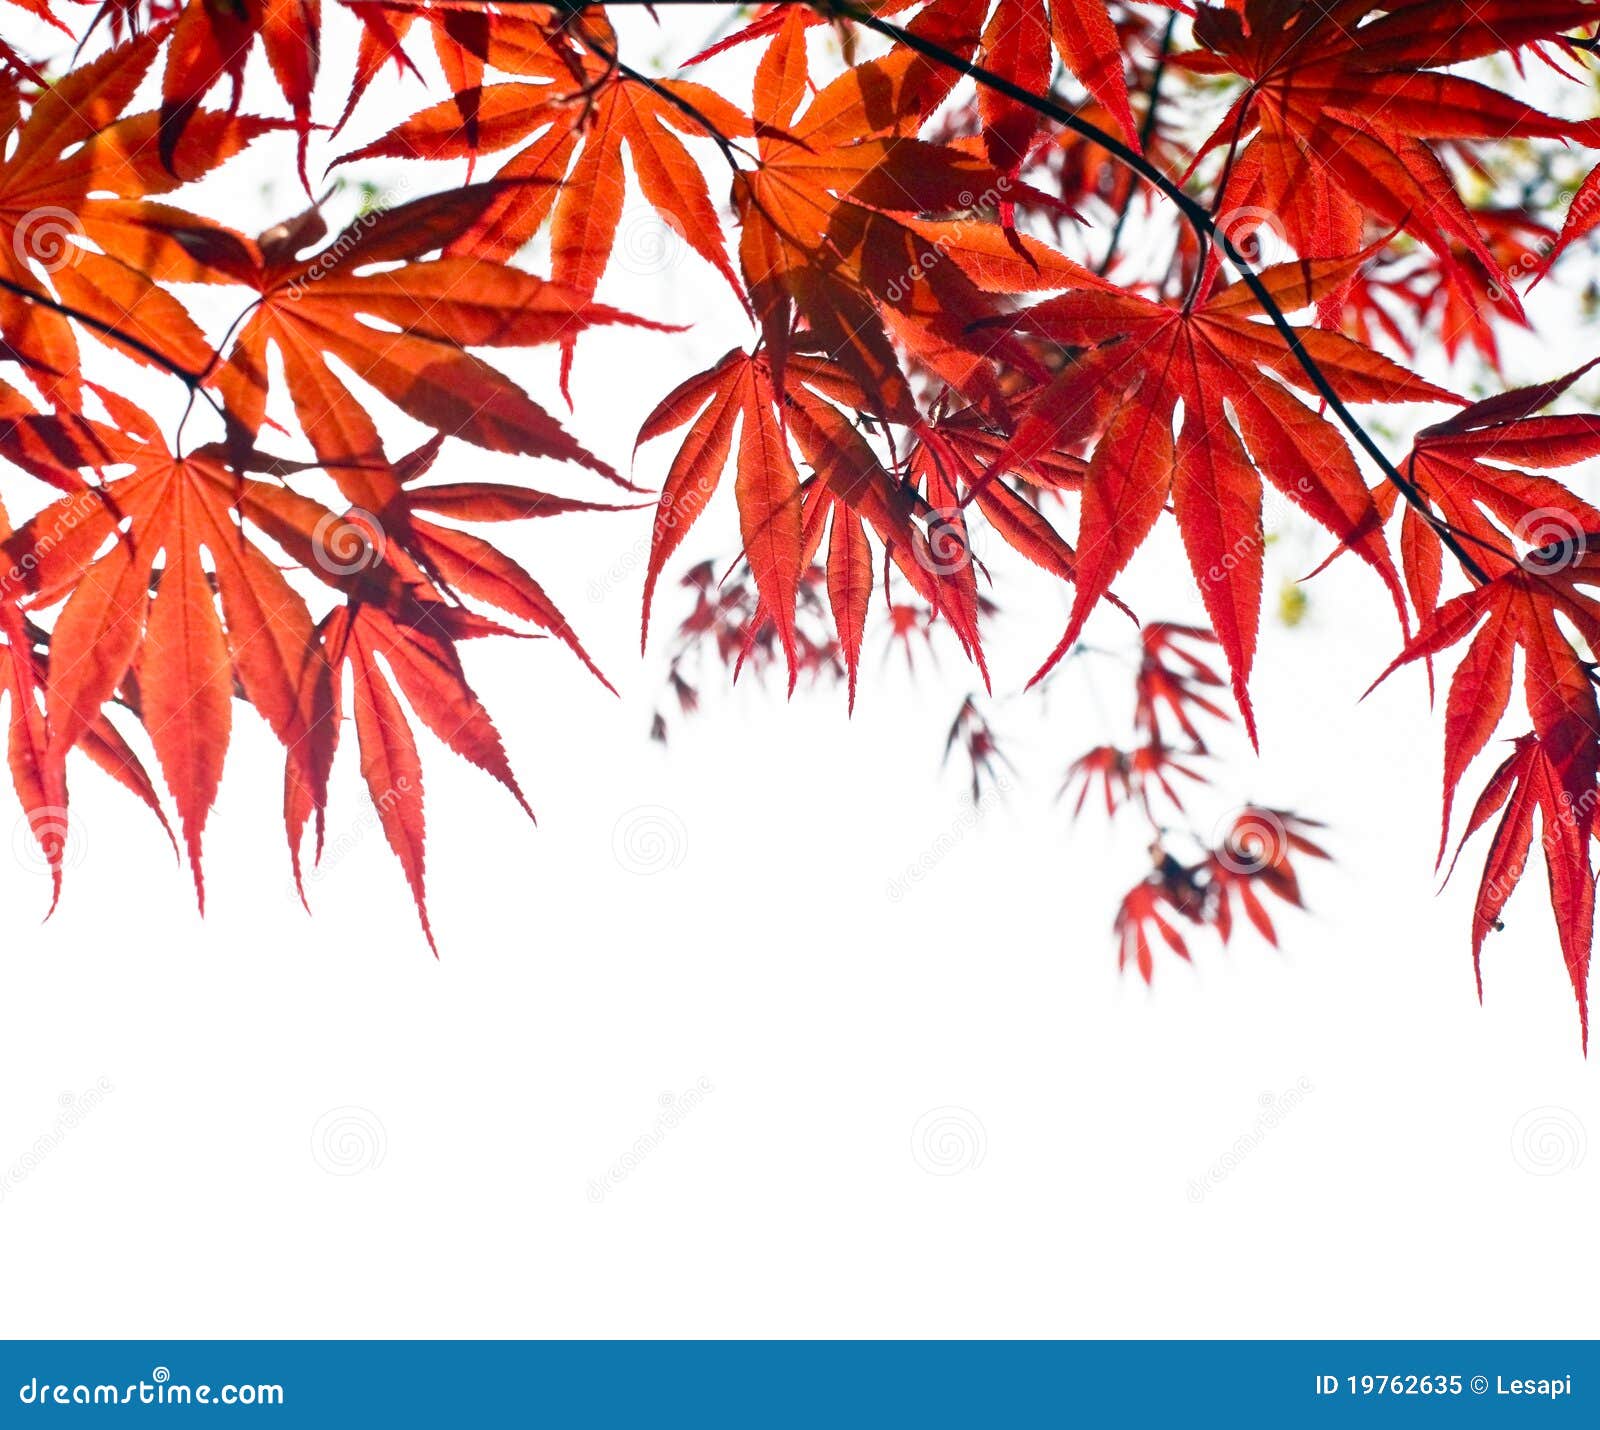 Red Japanese Maple Leaf Background on White. Stock Image - Image of bright,  spring: 19762635